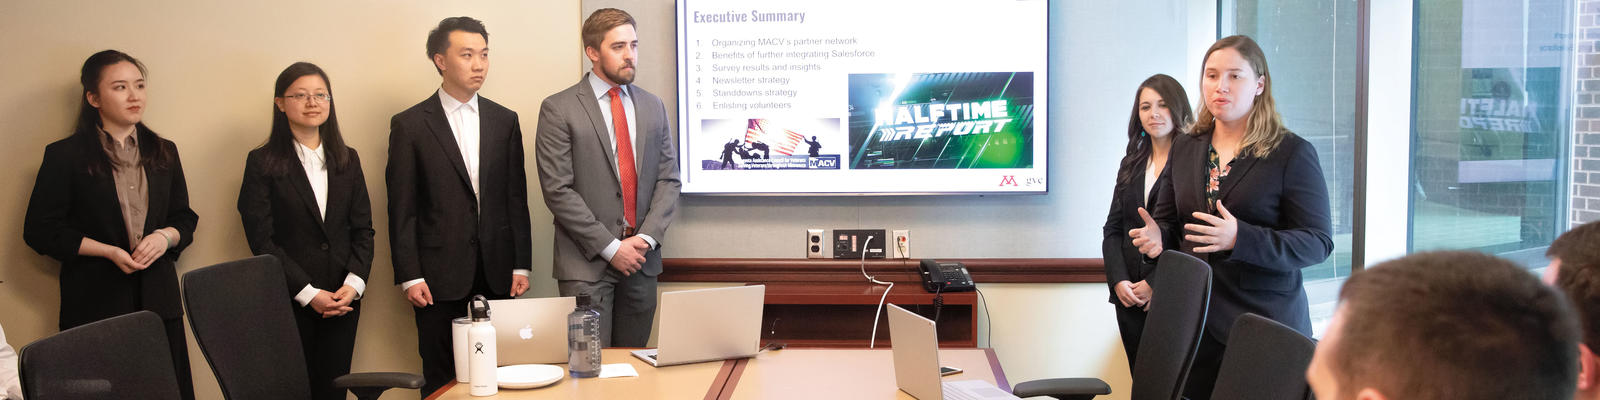 A group of graduate students gives a presentation in a board room.